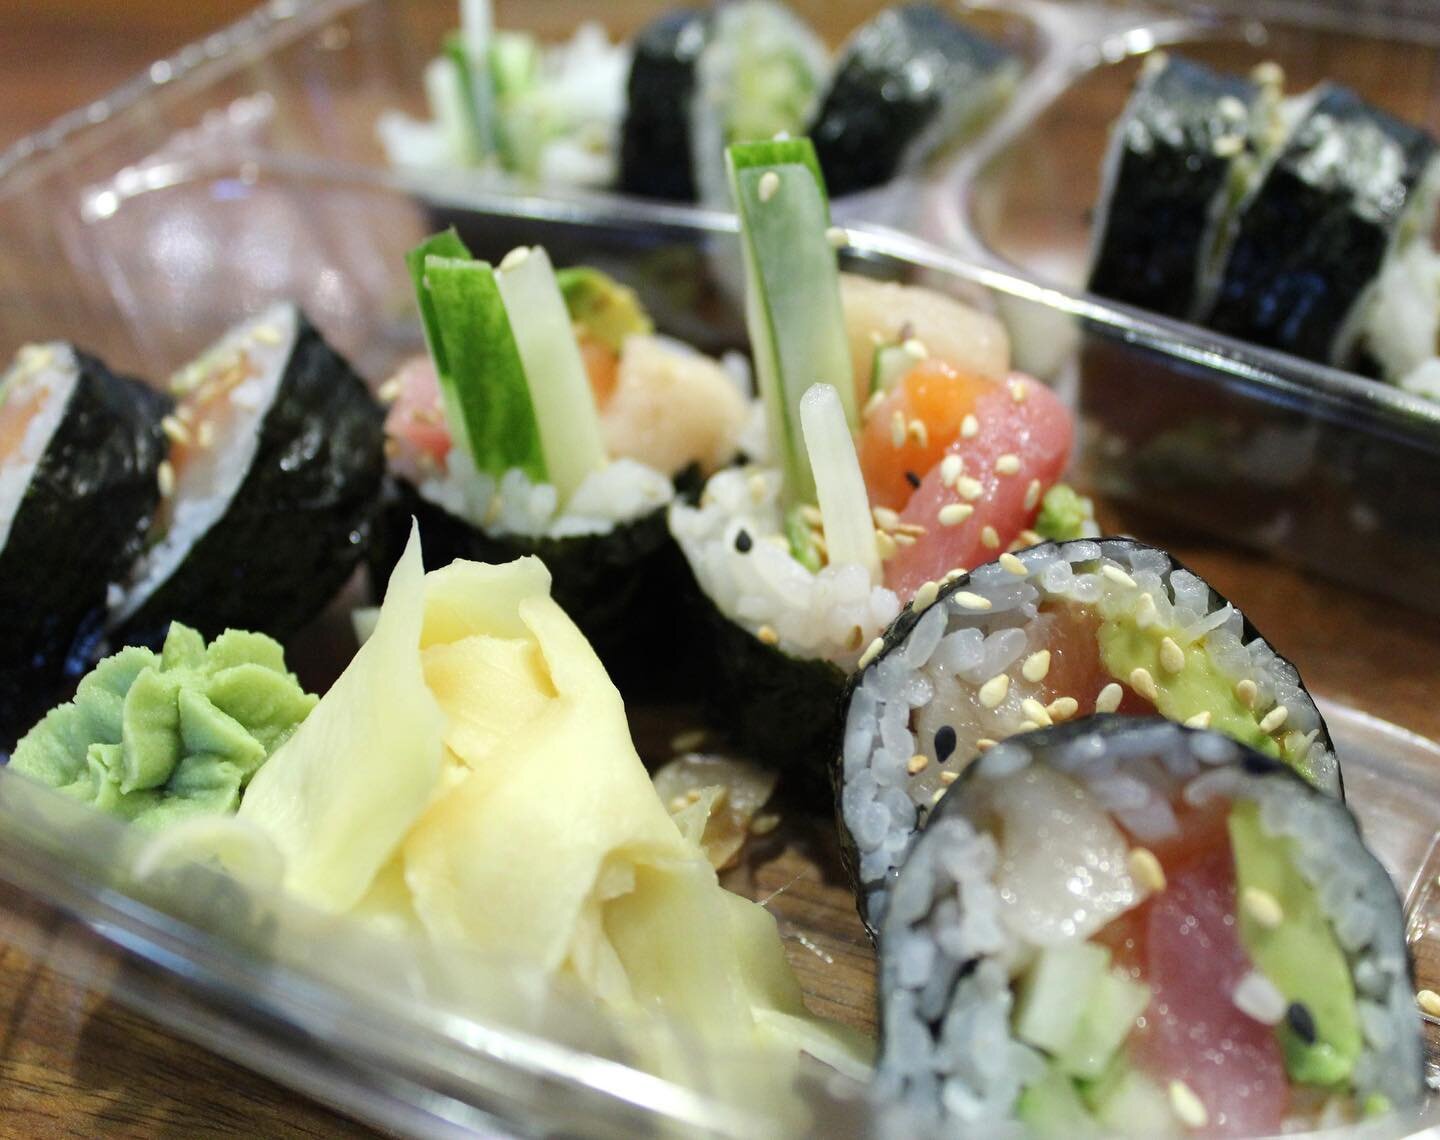 &bull; Bonsai Roll (packed for carry out) &bull;

ingredients:
tuna, salmon, yellowtail, cucumber, avocado, kaiware, sprinkled with red wine vinegar

photo creds:
@jayniescameraroll

COME VISIT US!
📍 find us on yelp! https://m.yelp.com/biz/tsukimi-a